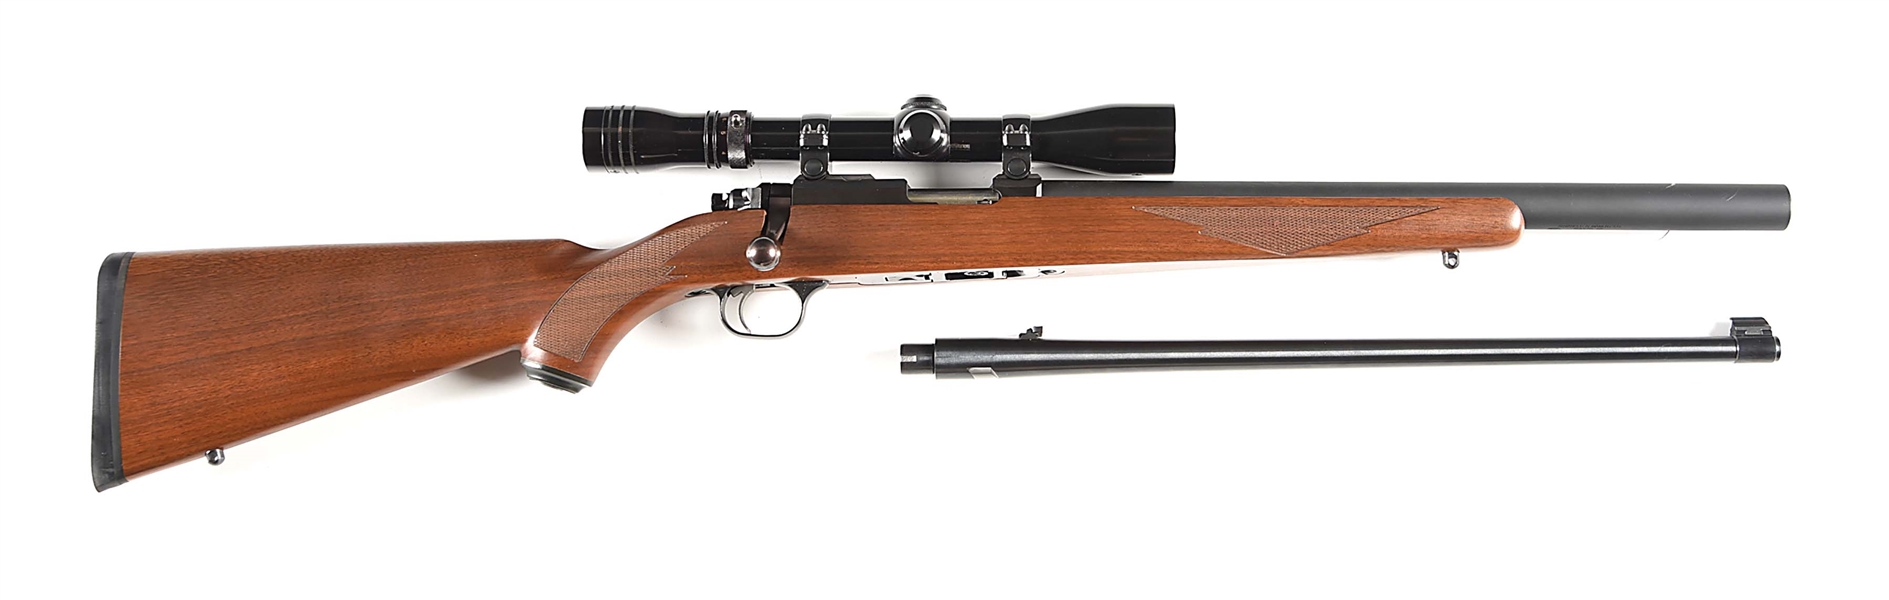 (N) INTEGRALLY SUPRESSED RUGER 77/22 BOLT ACTION RIFLE WITH ADVANCED ARMAMENT CO. PHOENIX SILENCER (SILENCER).